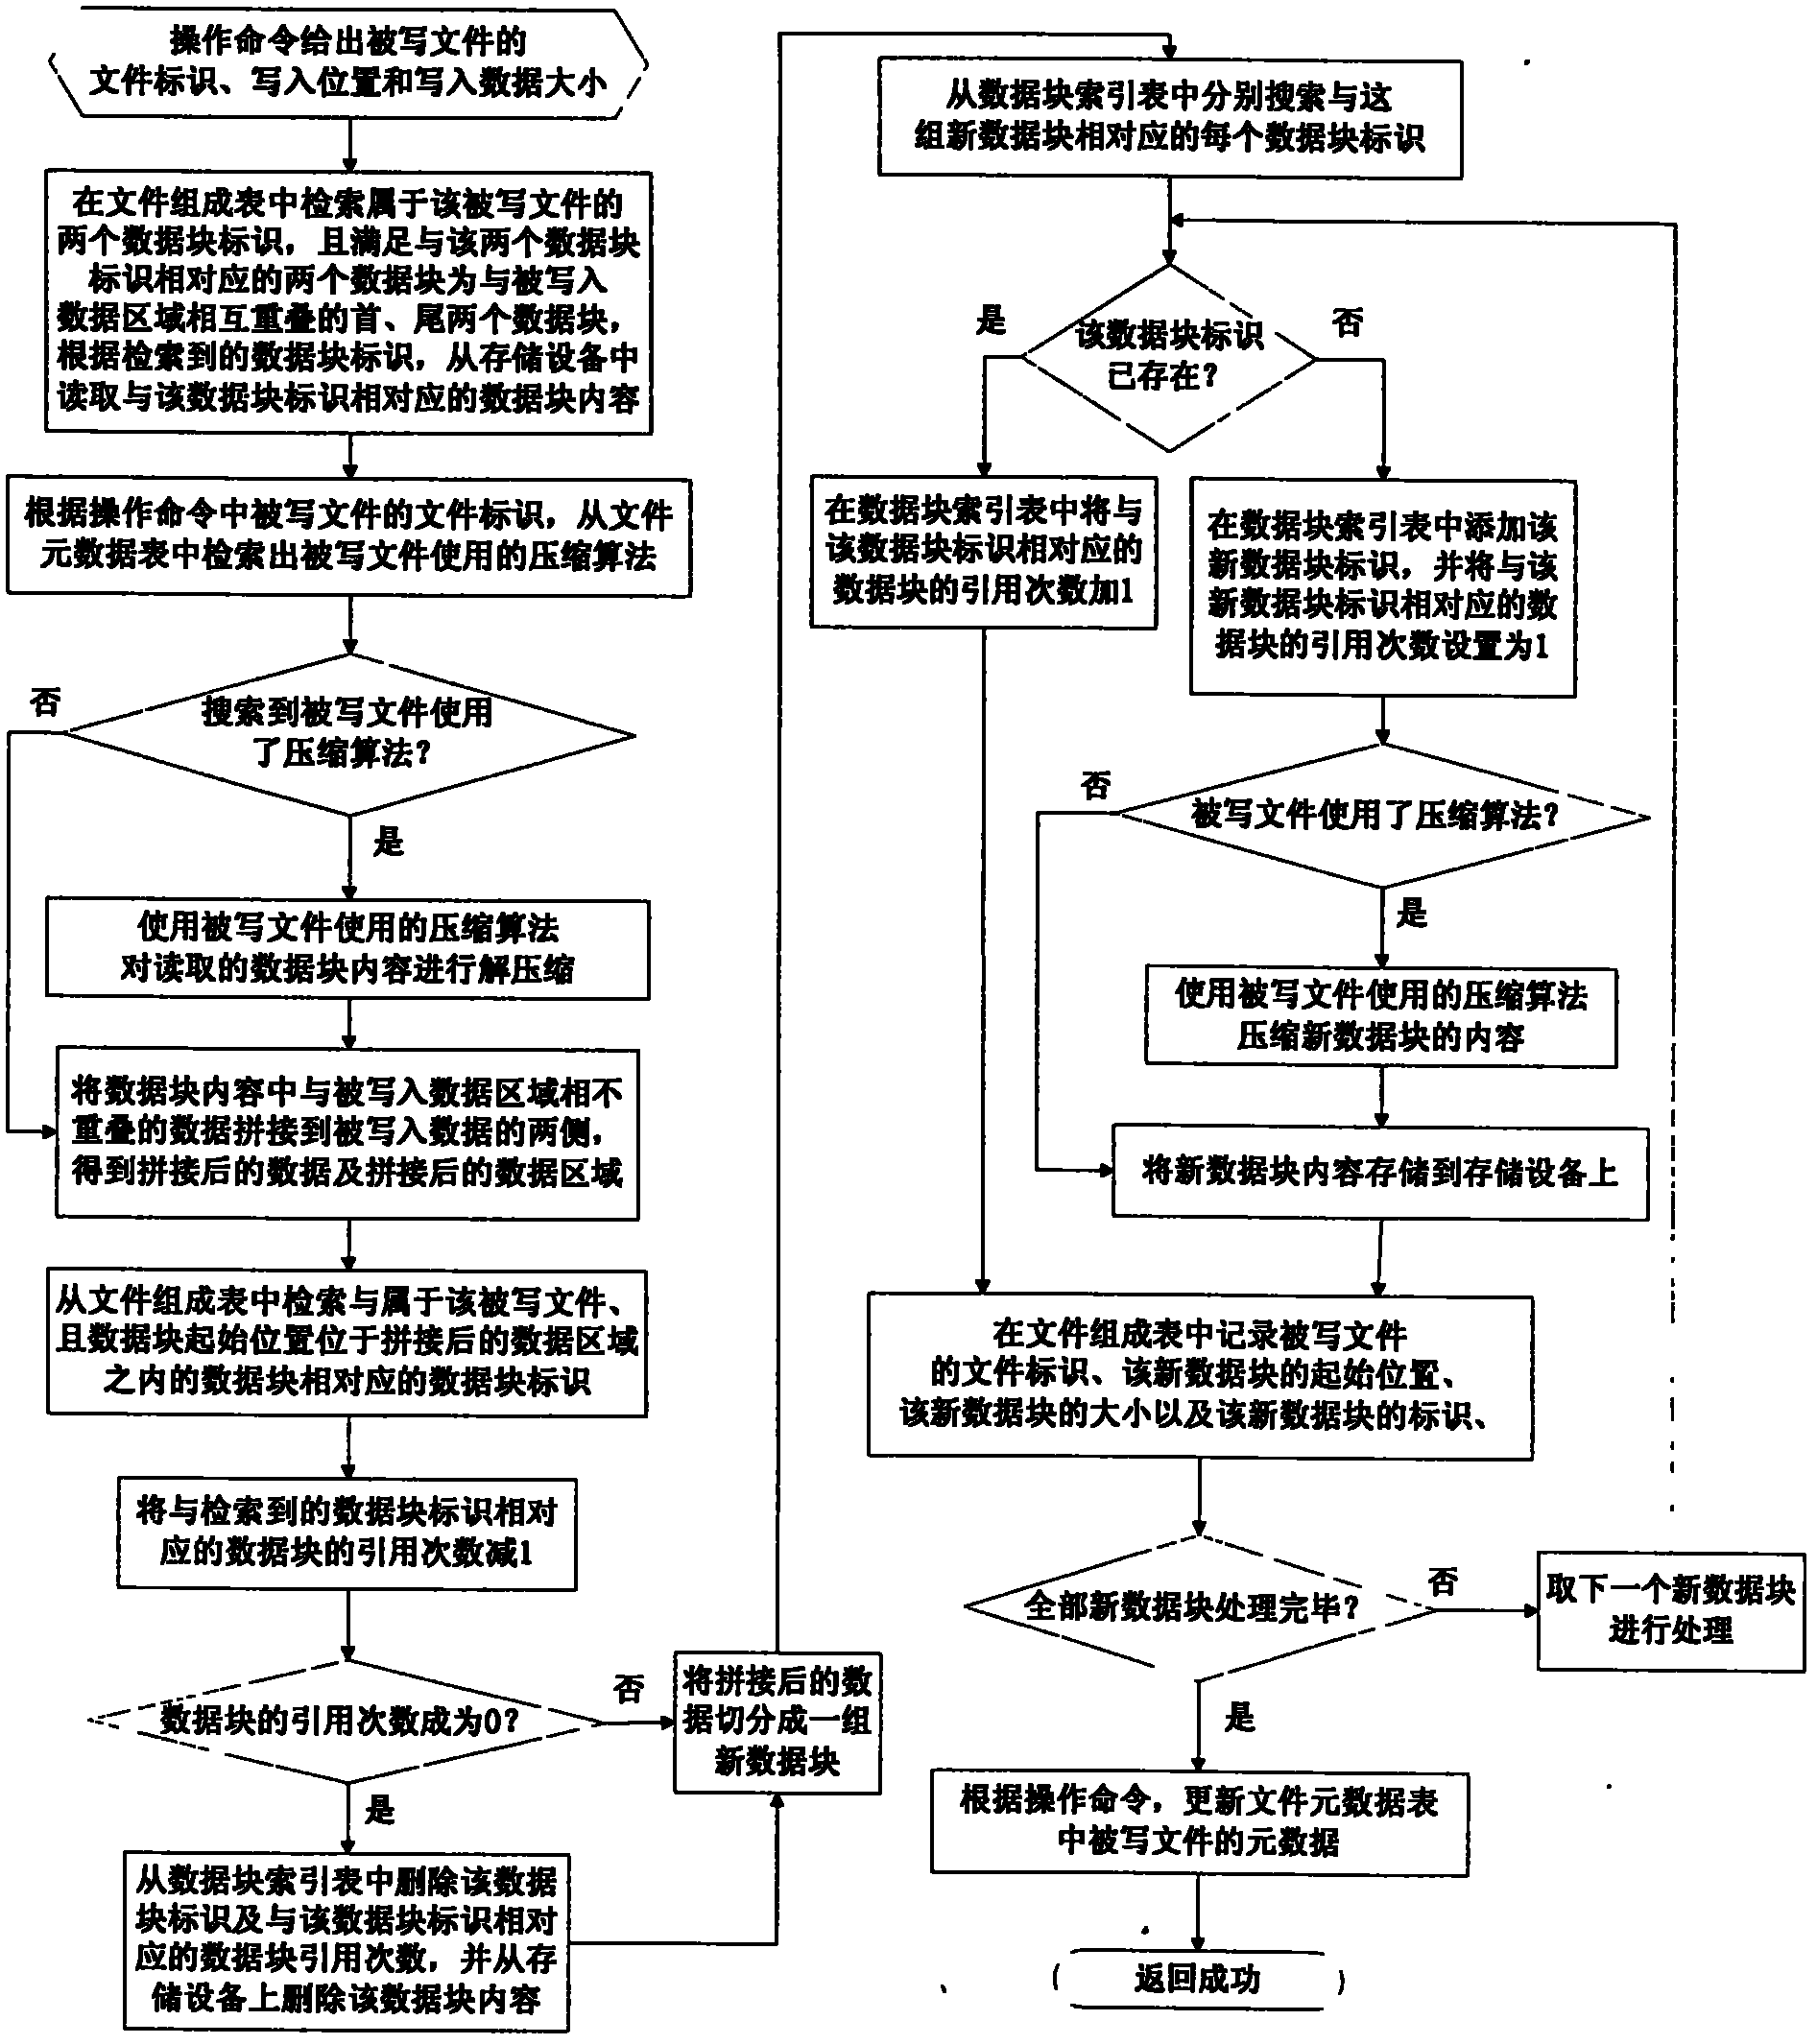 Configurable real-time transparent compressing method in file system